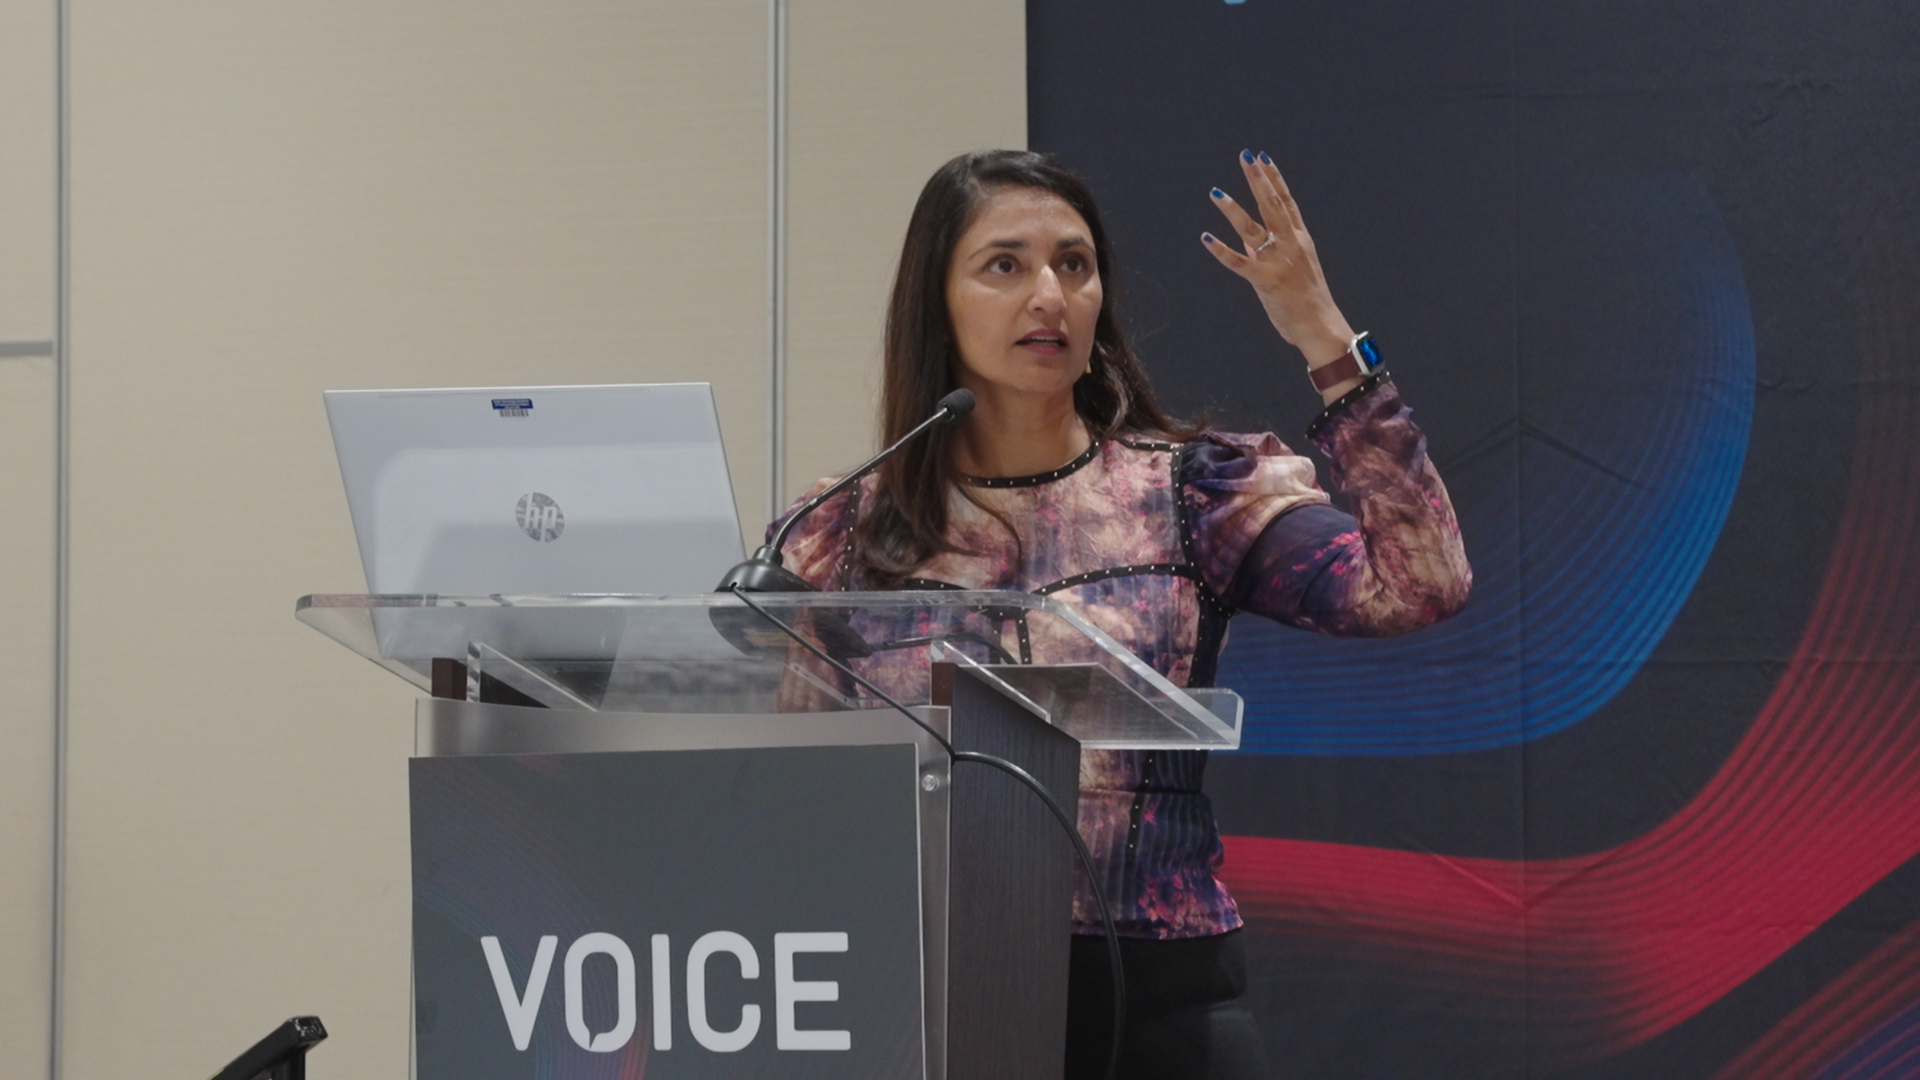 VOICE22 | AI-Powered Voice Prostheses: A New Standard of Care For Those Living With Speechlessness | Rupal Patel